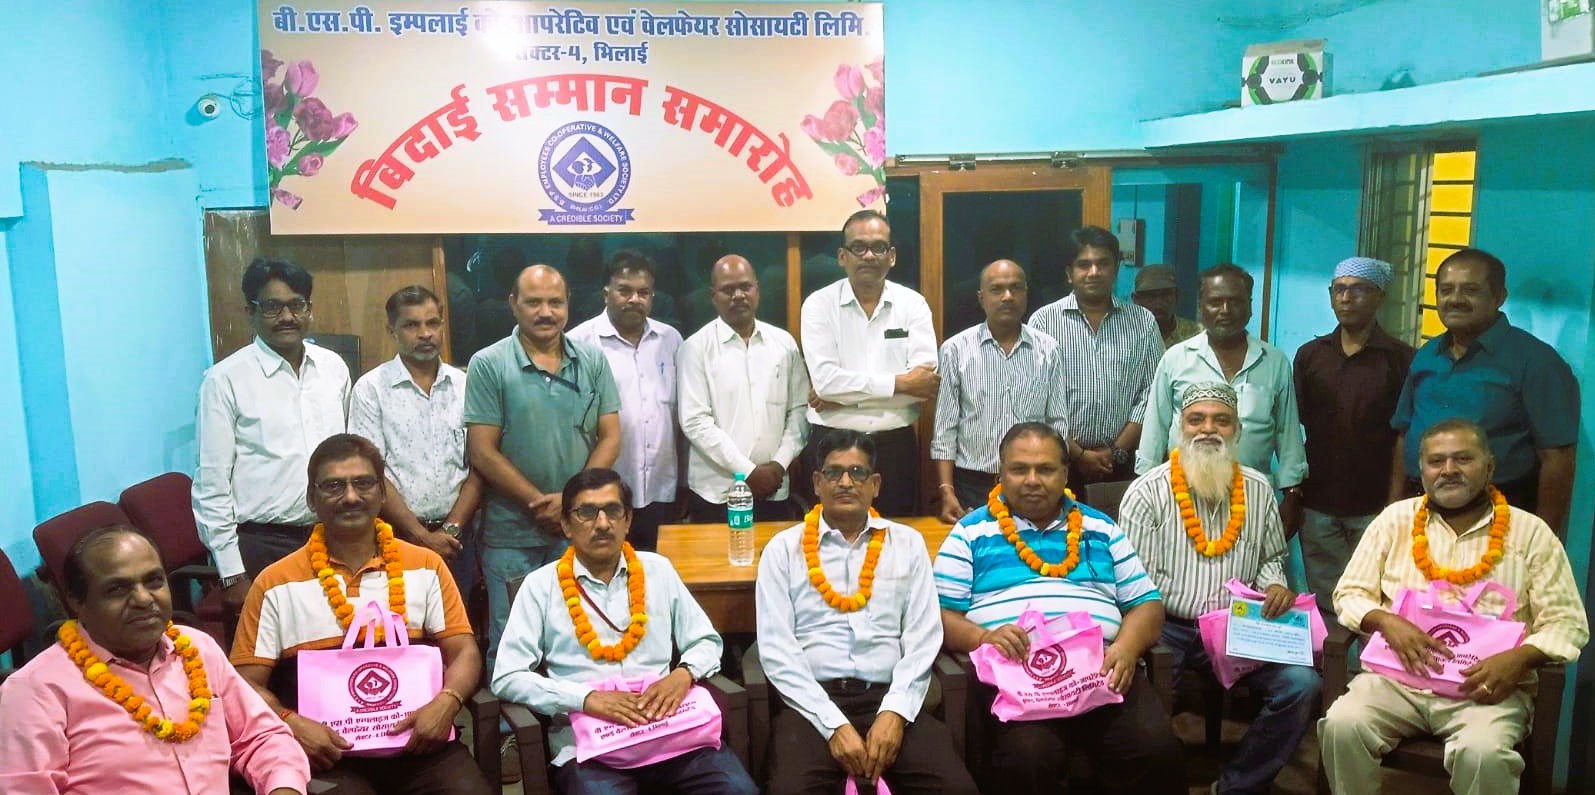 BSP Co-operative Society Sector-4 gave farewell to retired personnel